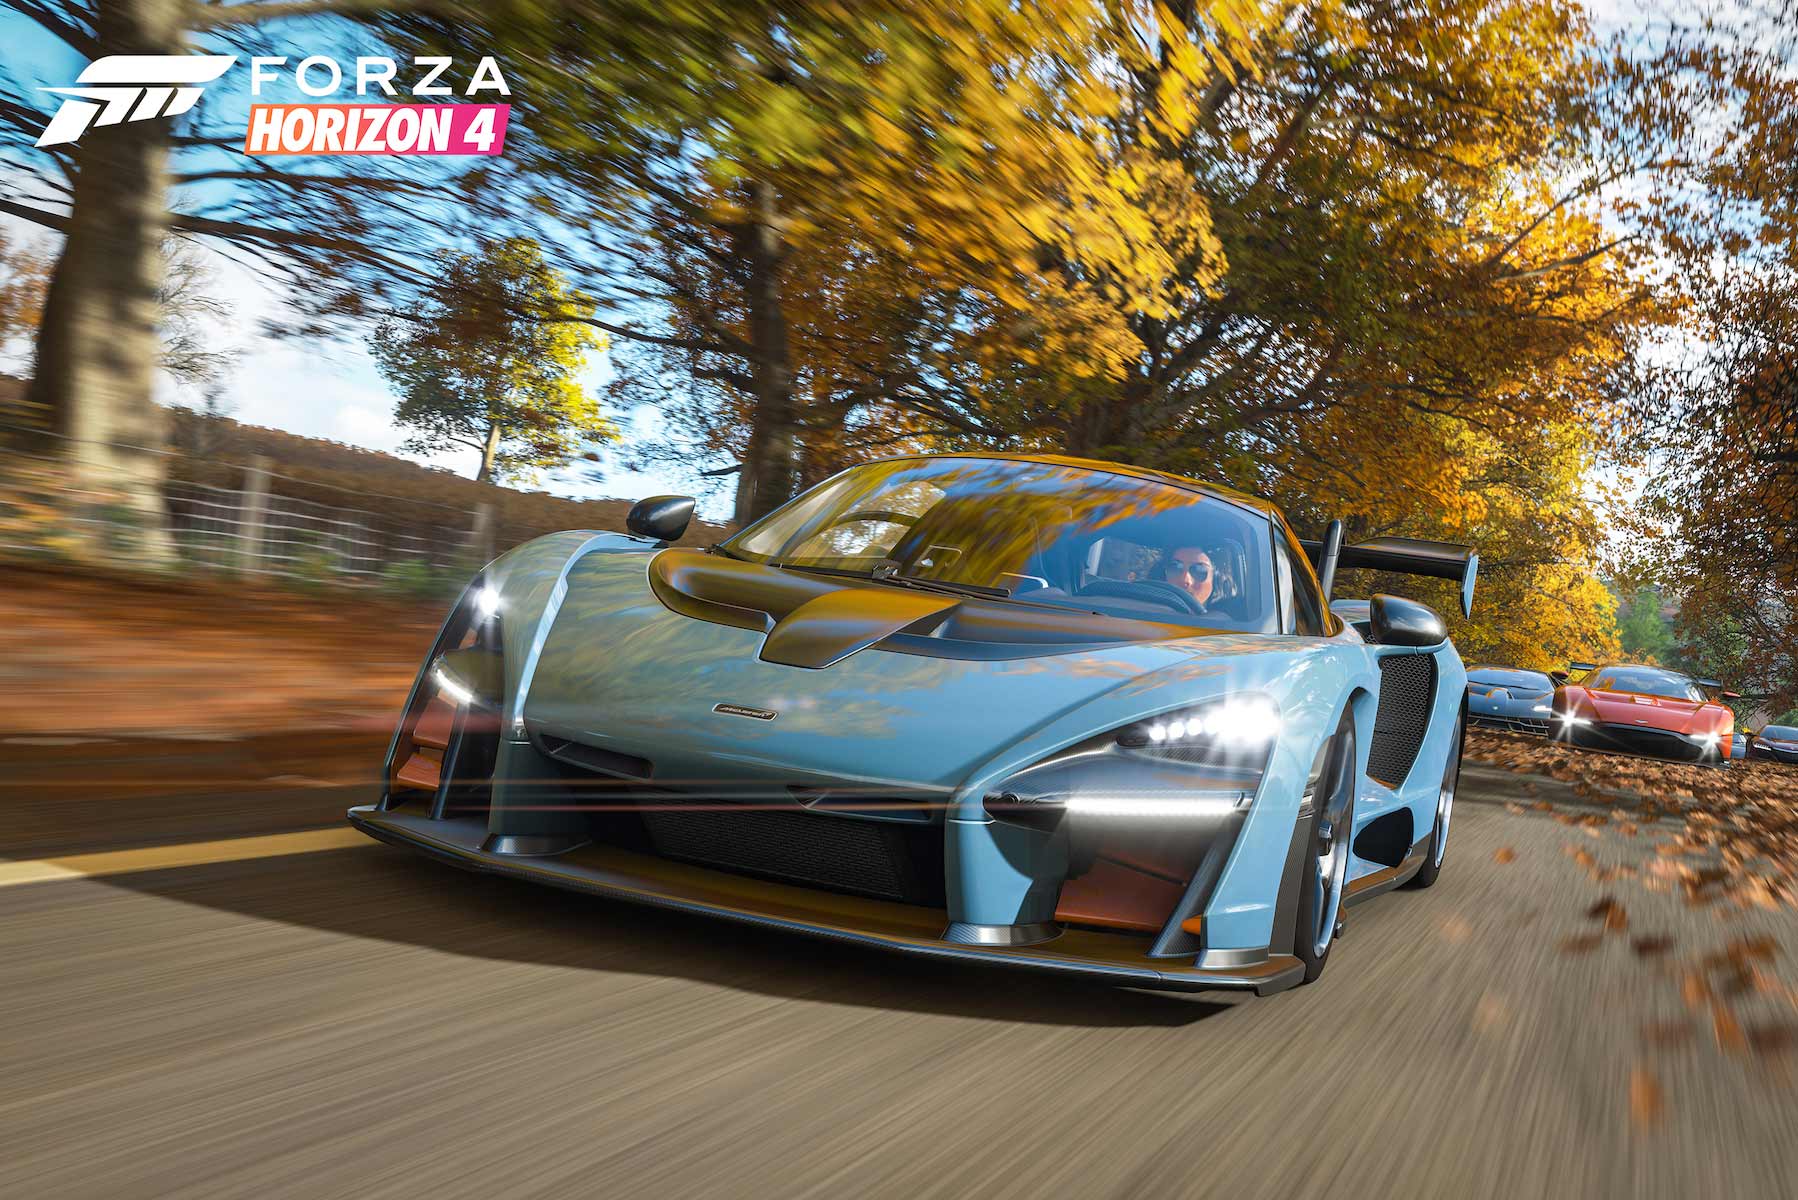 Forza Horizon 4's system requirements are the same as Forza Horizon 3's